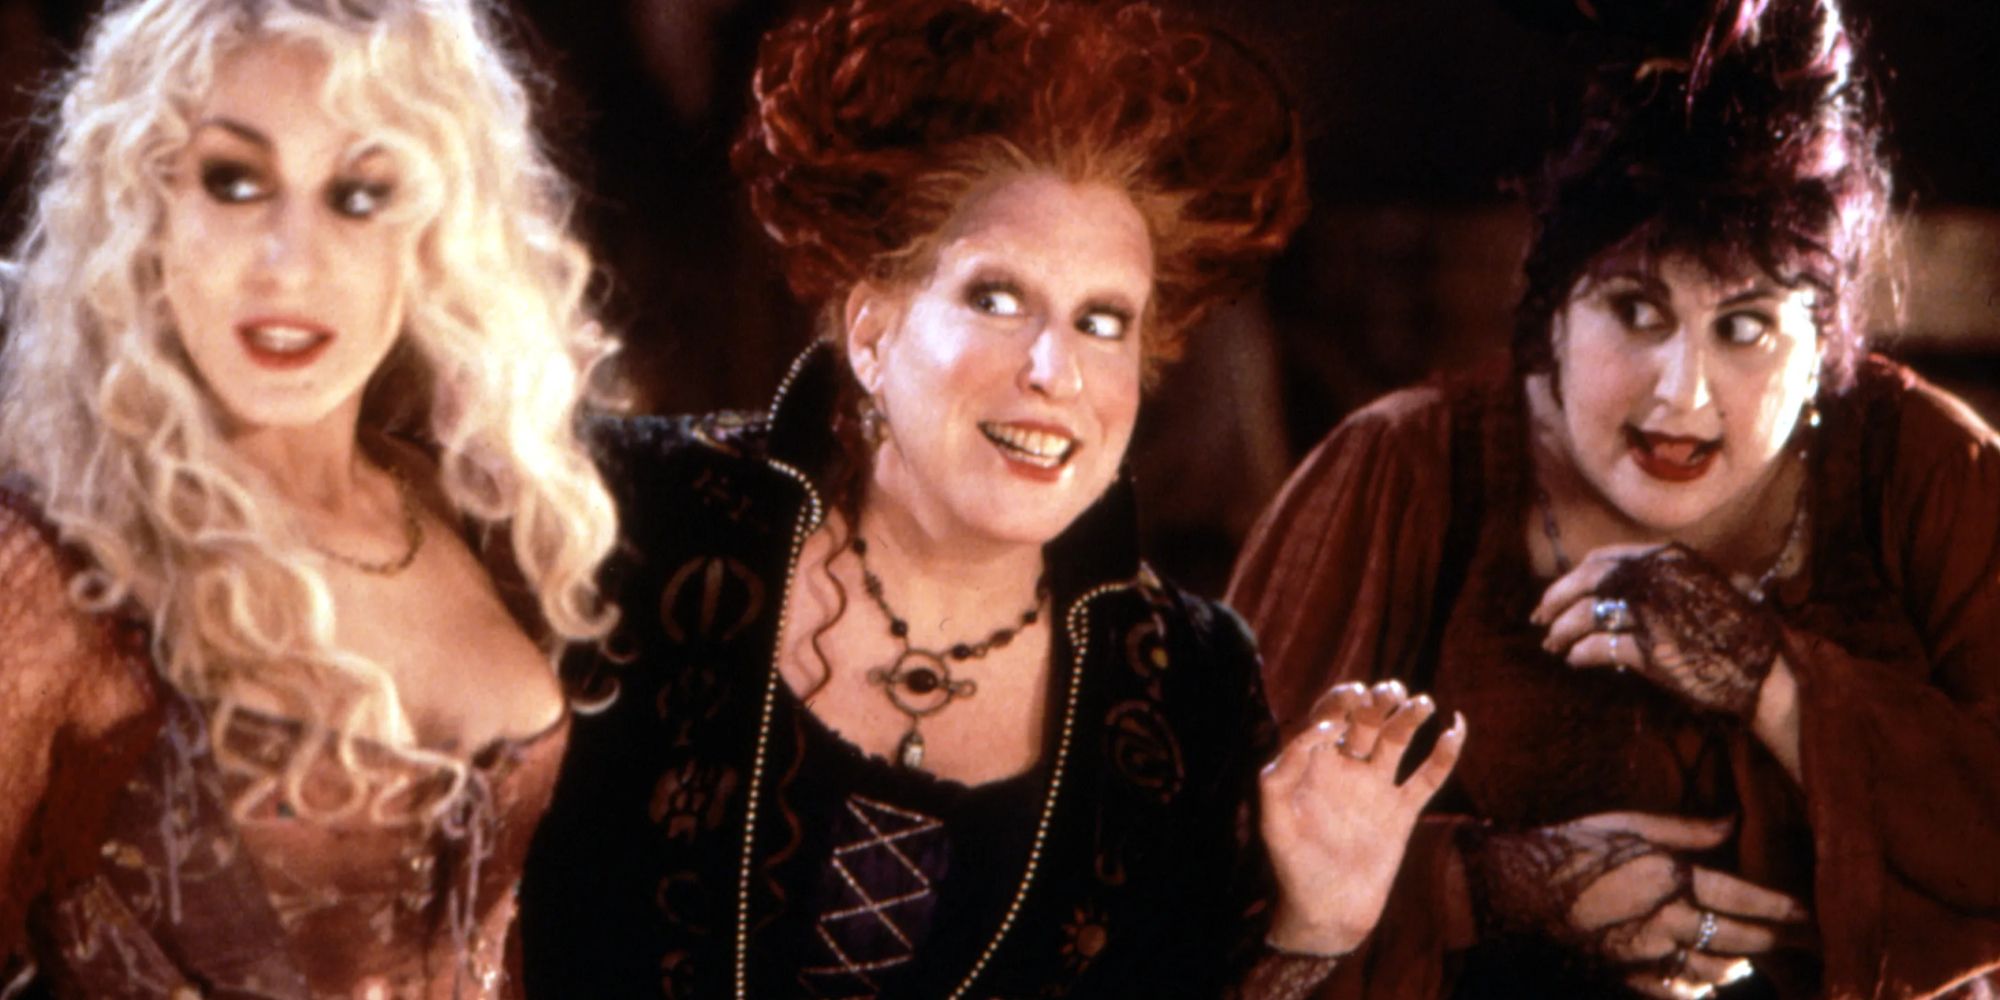 Sarah Jessica Parker, Bette Midler, and Kathy Najimy as witches 